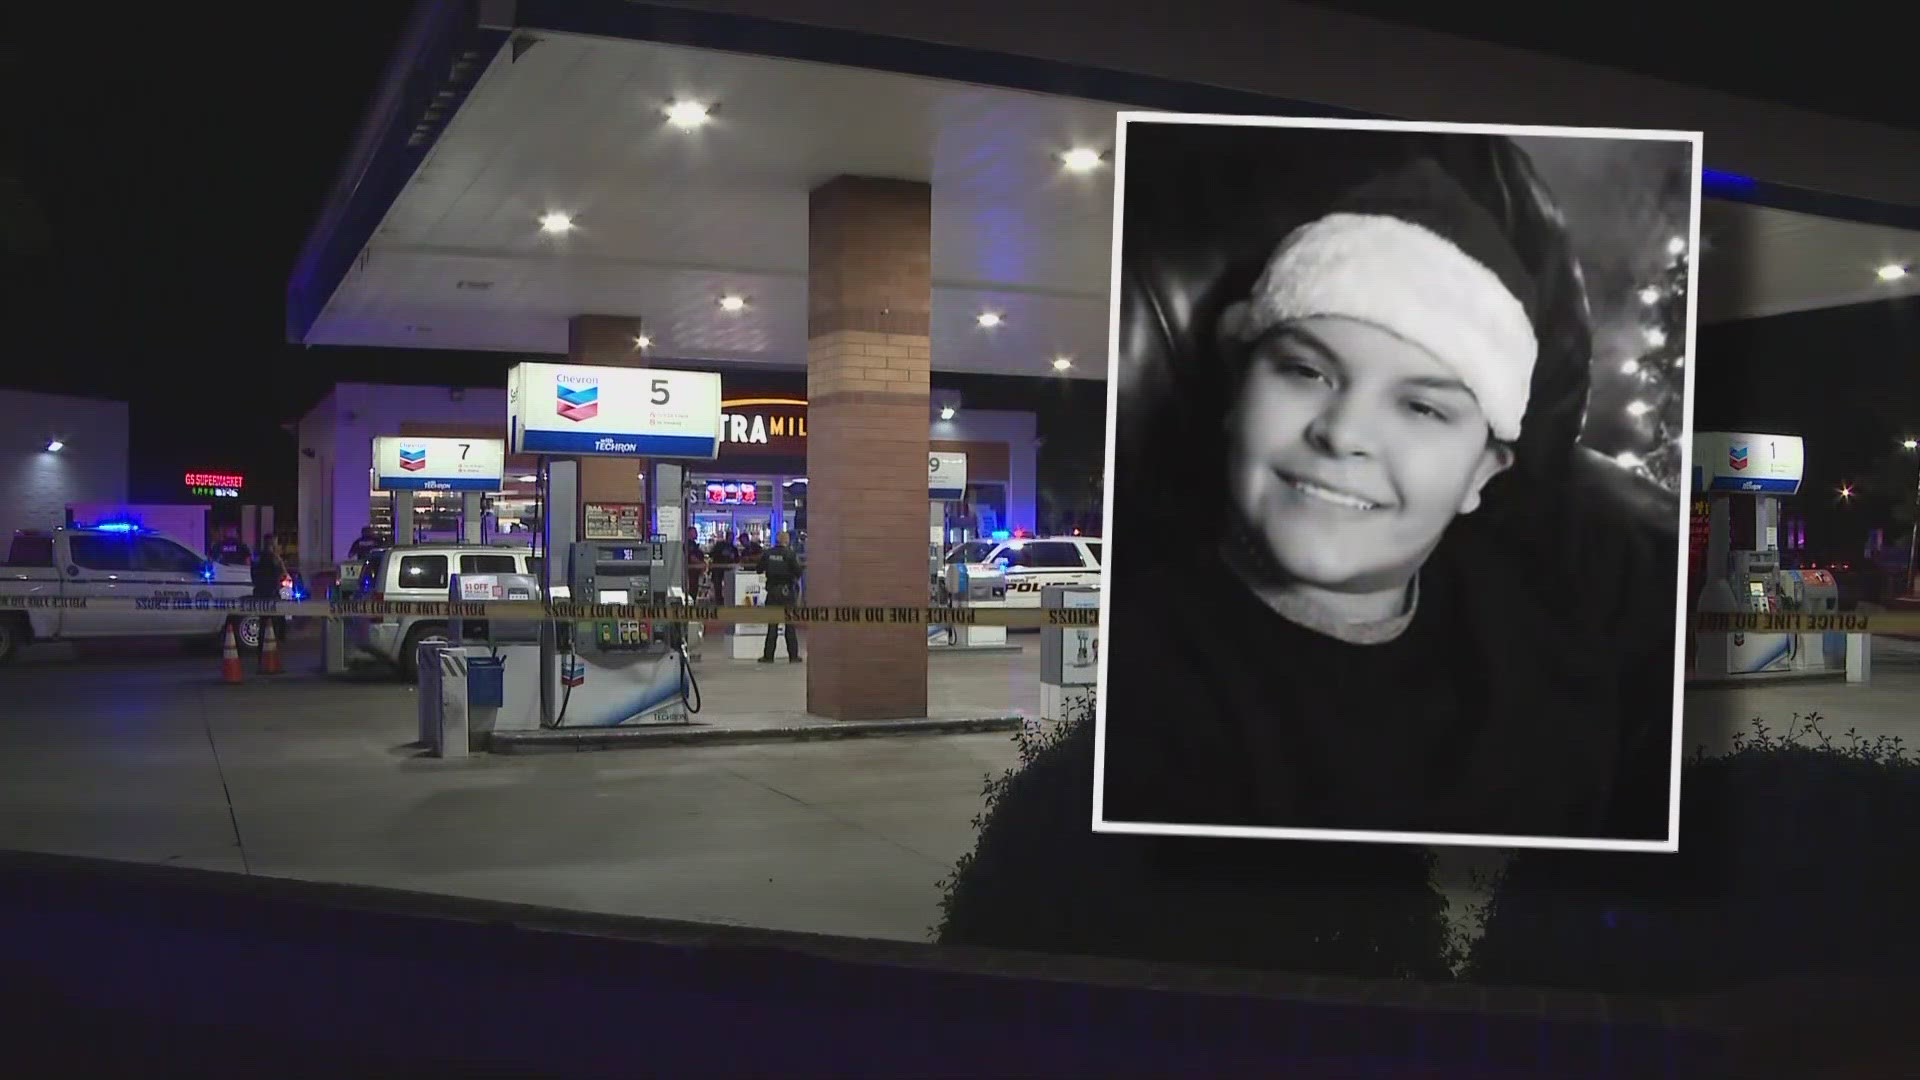 Irma Ivonne Rivera Martinez was killed last Friday night near 51st and Glendale avenues. A suspect was recently arrested.